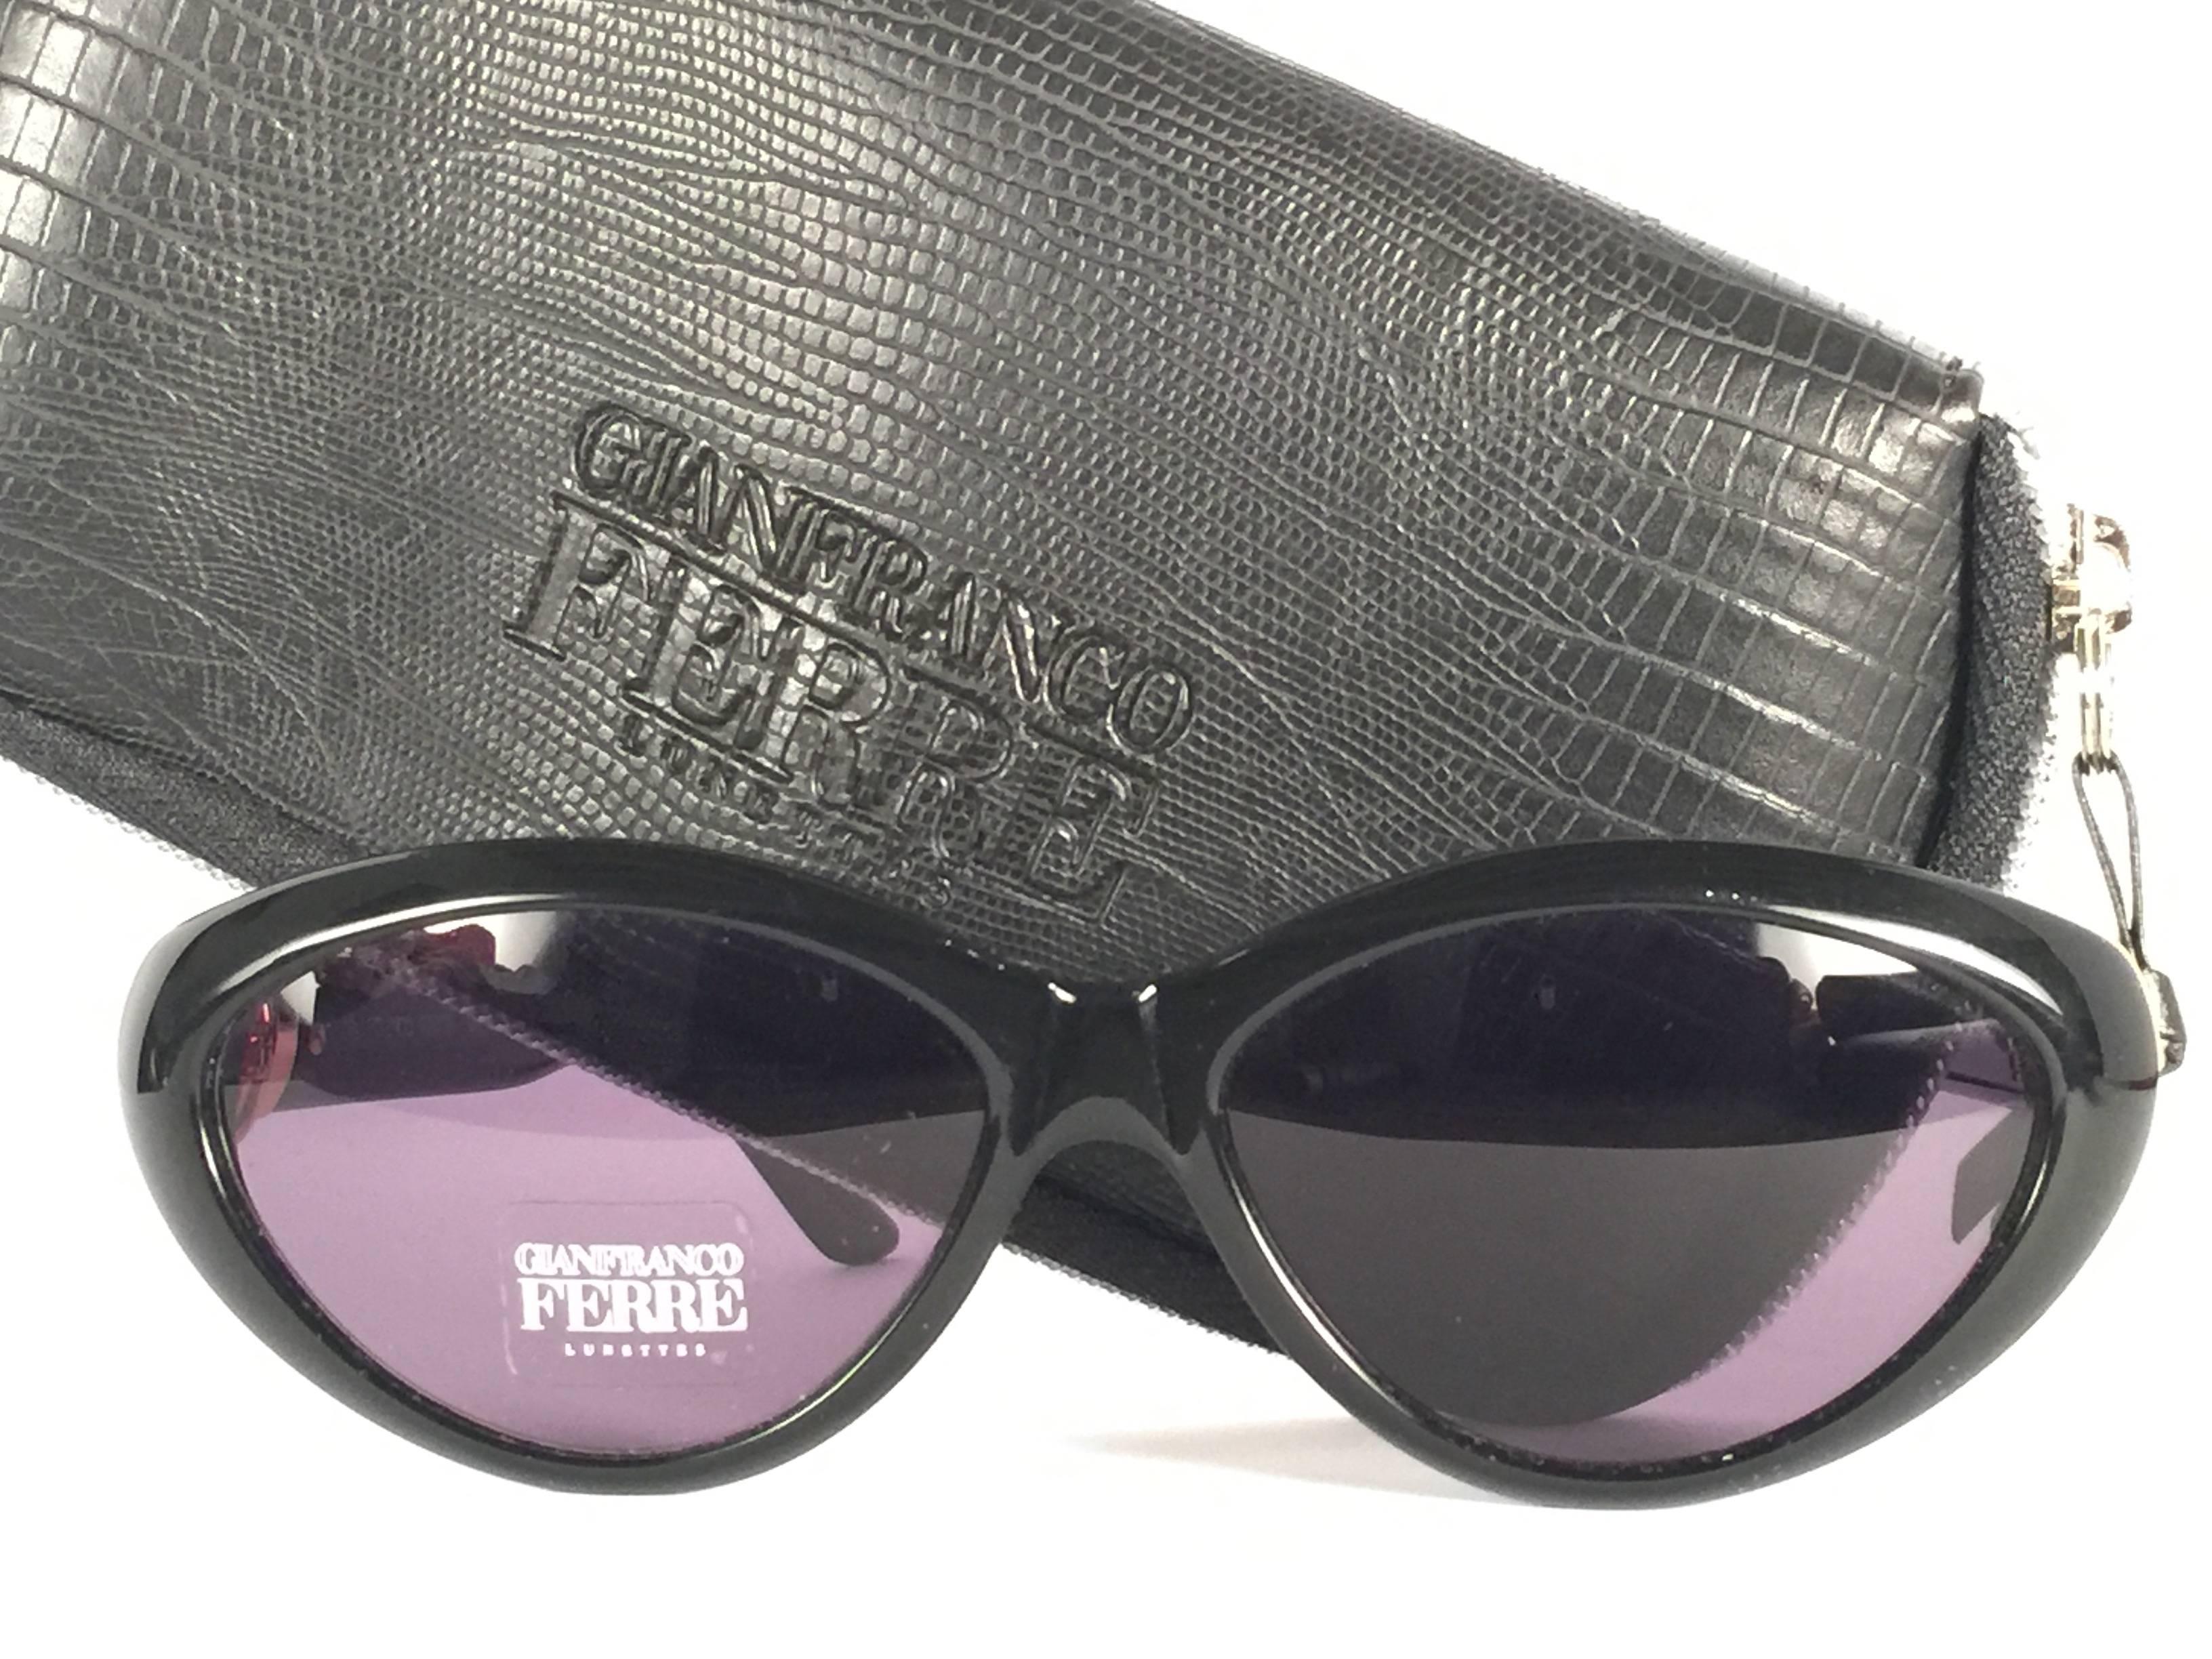 New Vintage Gianfranco Ferré Black & Rhinestones 1990's Made in Italy Sunglasses For Sale 3